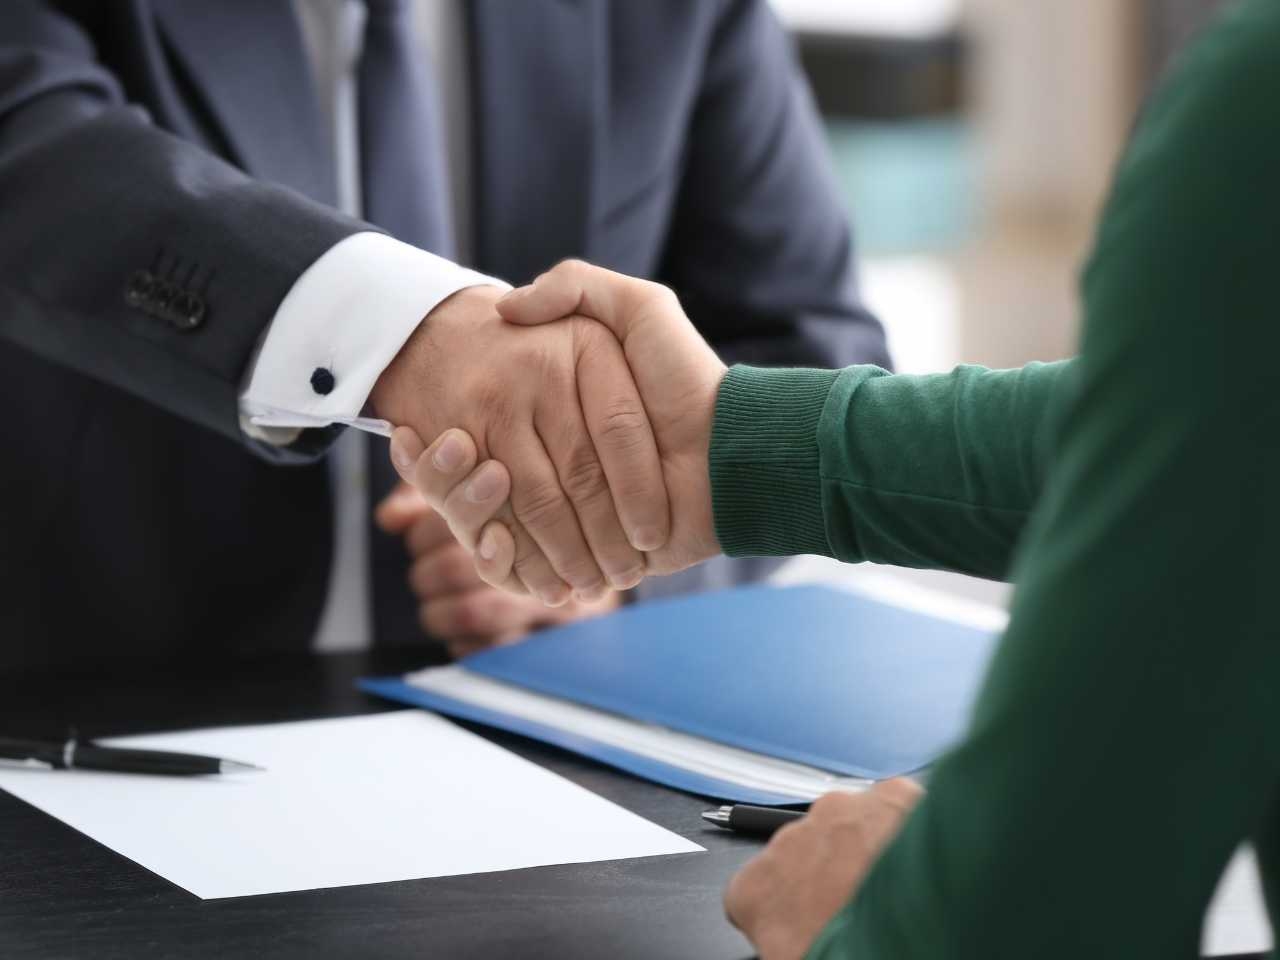 a client reaches across a desk to shake hands with a lawyer